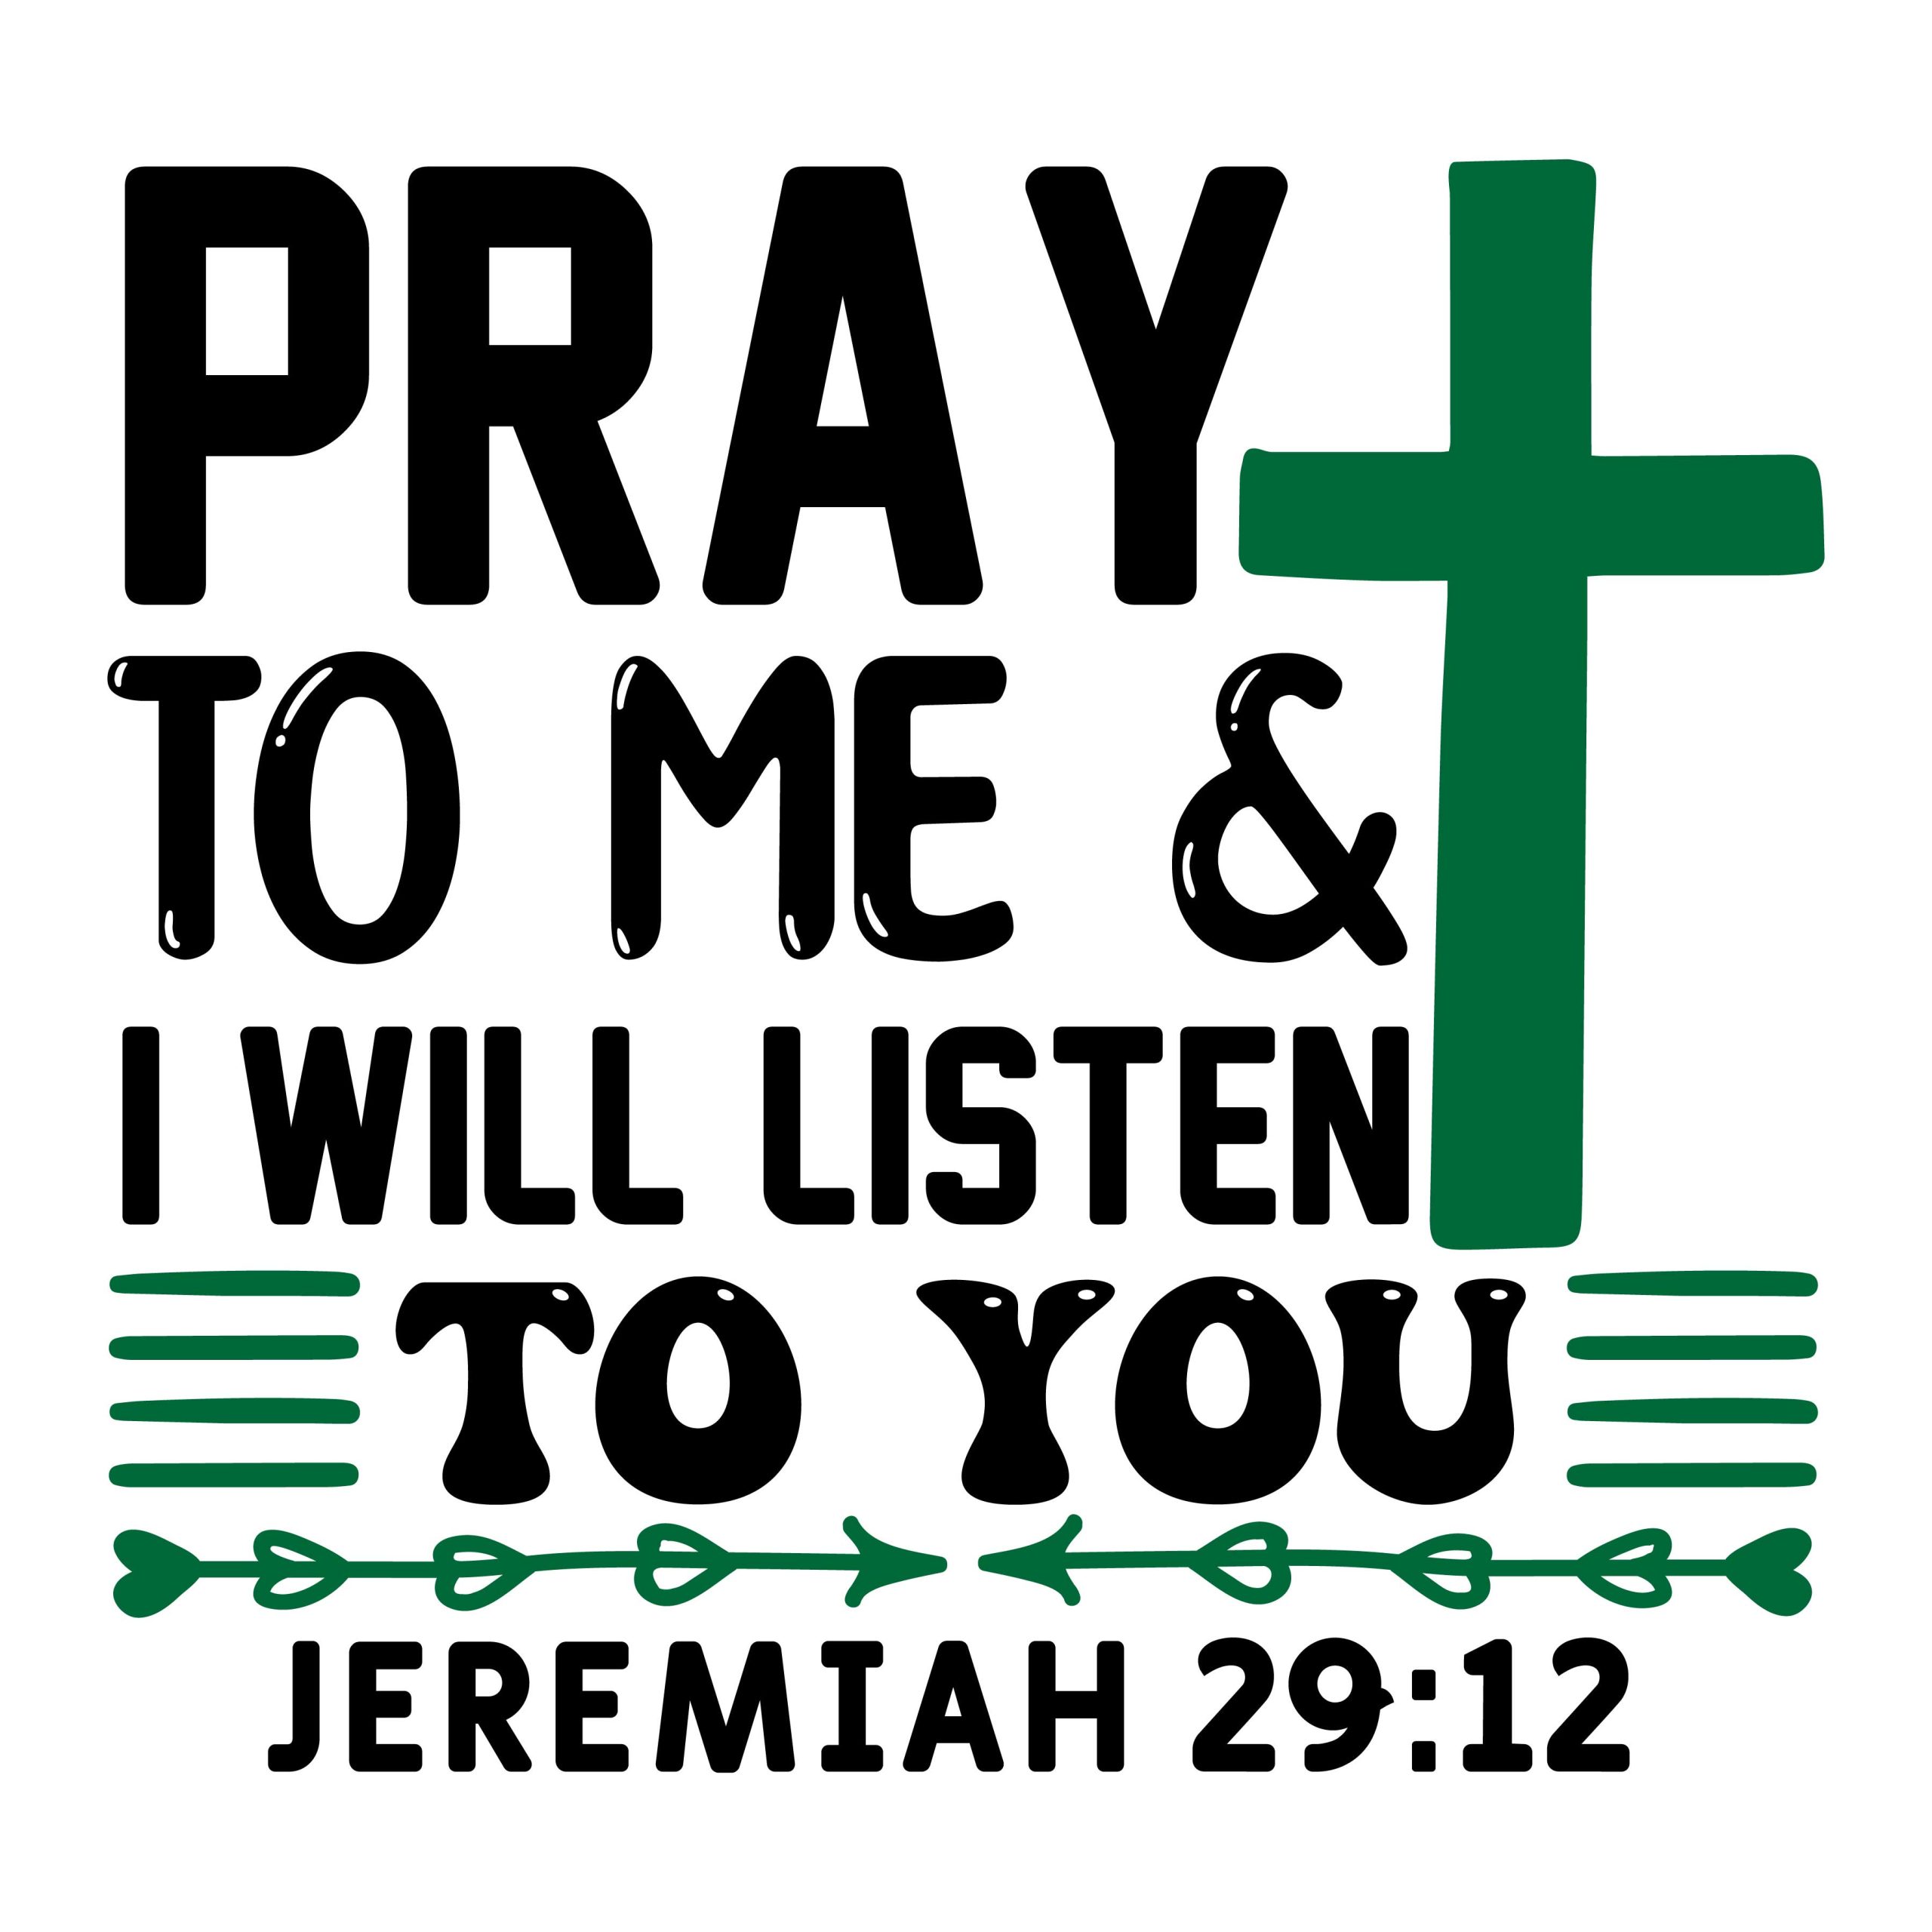 Pray to me and i will listen to you Jeremiah 29:12, bible verses, scripture verses, svg files, passages, sayings, cricut designs, silhouette, embroidery, bundle, free cut files, design space, vector